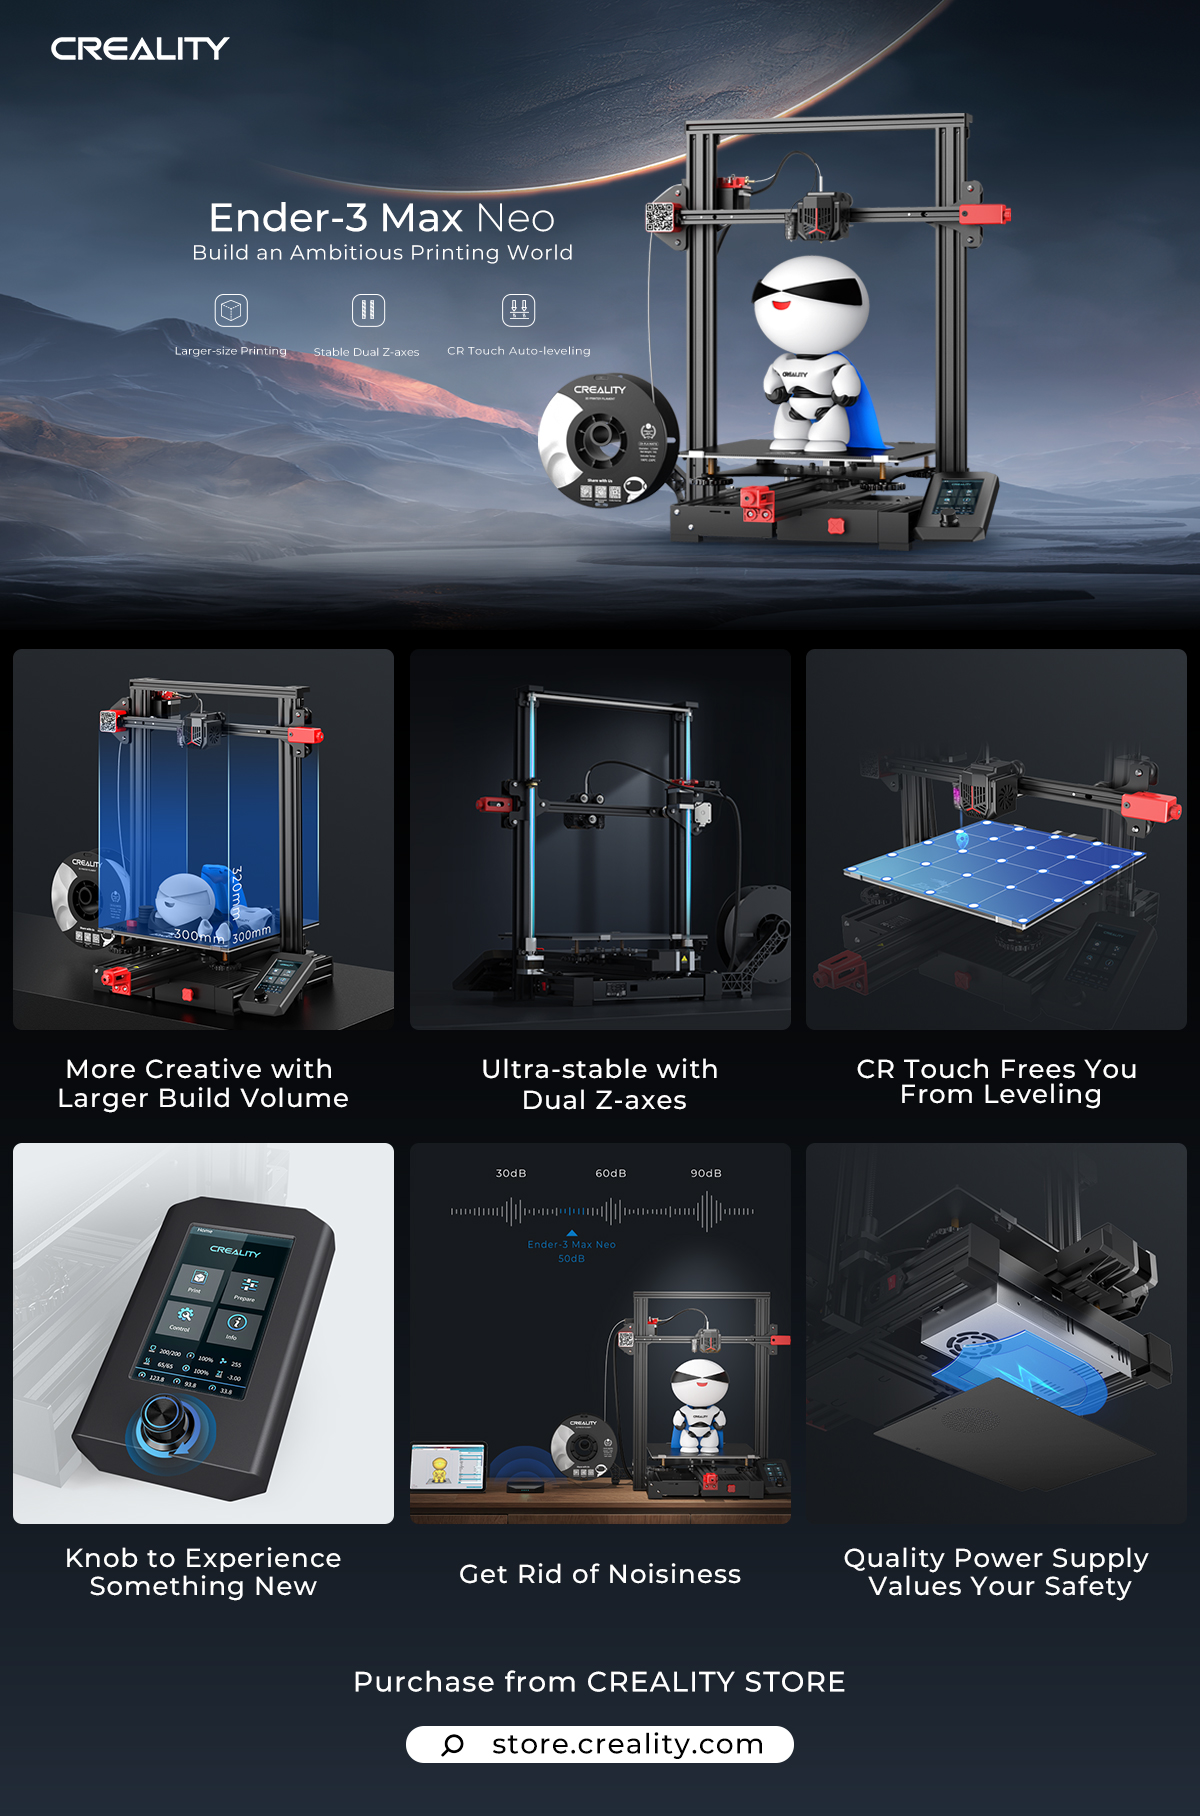 Ender-3 Neo, Ender-3 V2 Neo, And Ender-3 Max Neo, Which Is The